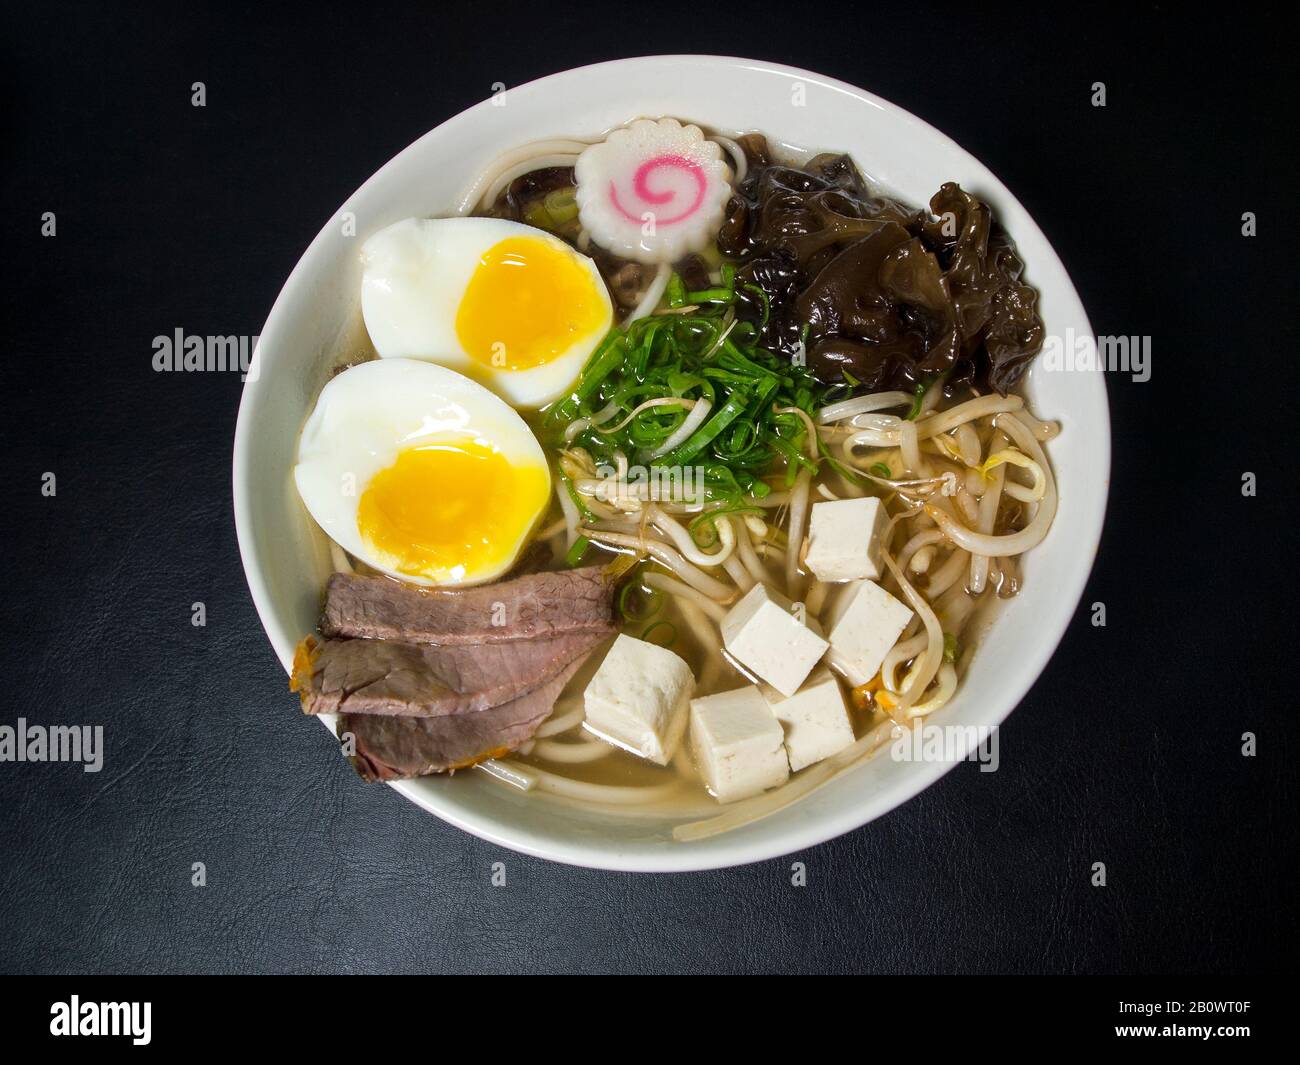 Ramen: Asian noodle soup with beef, eggs, fungi, vegetables, tofu, seaweed and naruto in a bowl. Black background. Top view. Stock Photo